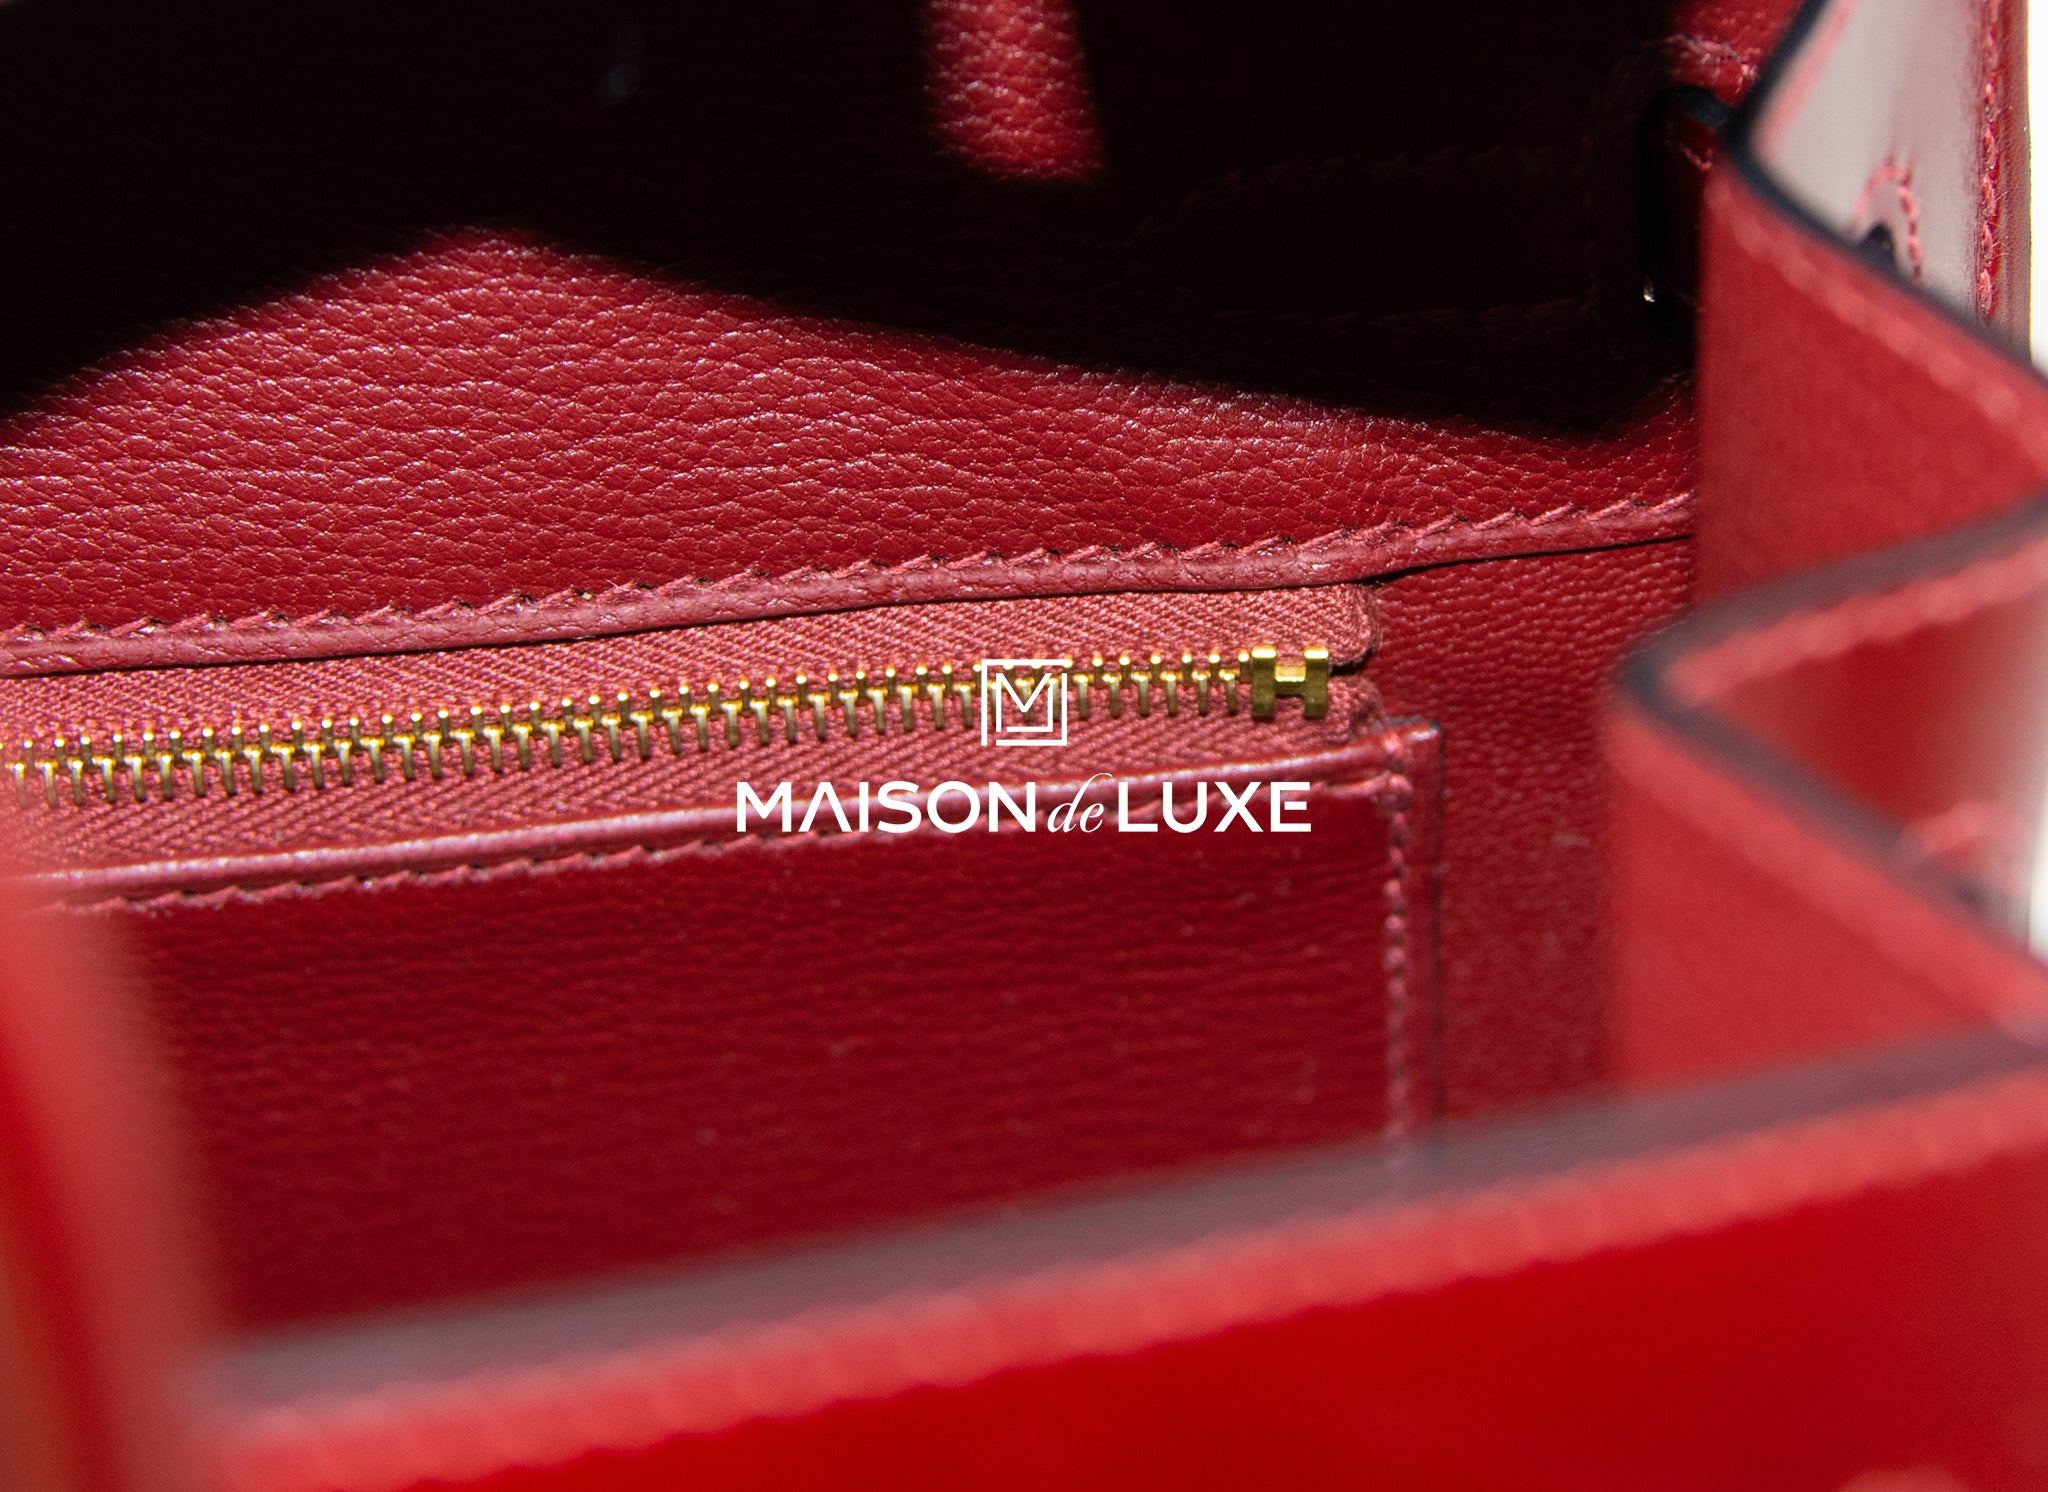 A PERSONALIZED ROUGE H CALF BOX LEATHER HAC BIRKIN 60 WITH GOLD HARDWARE